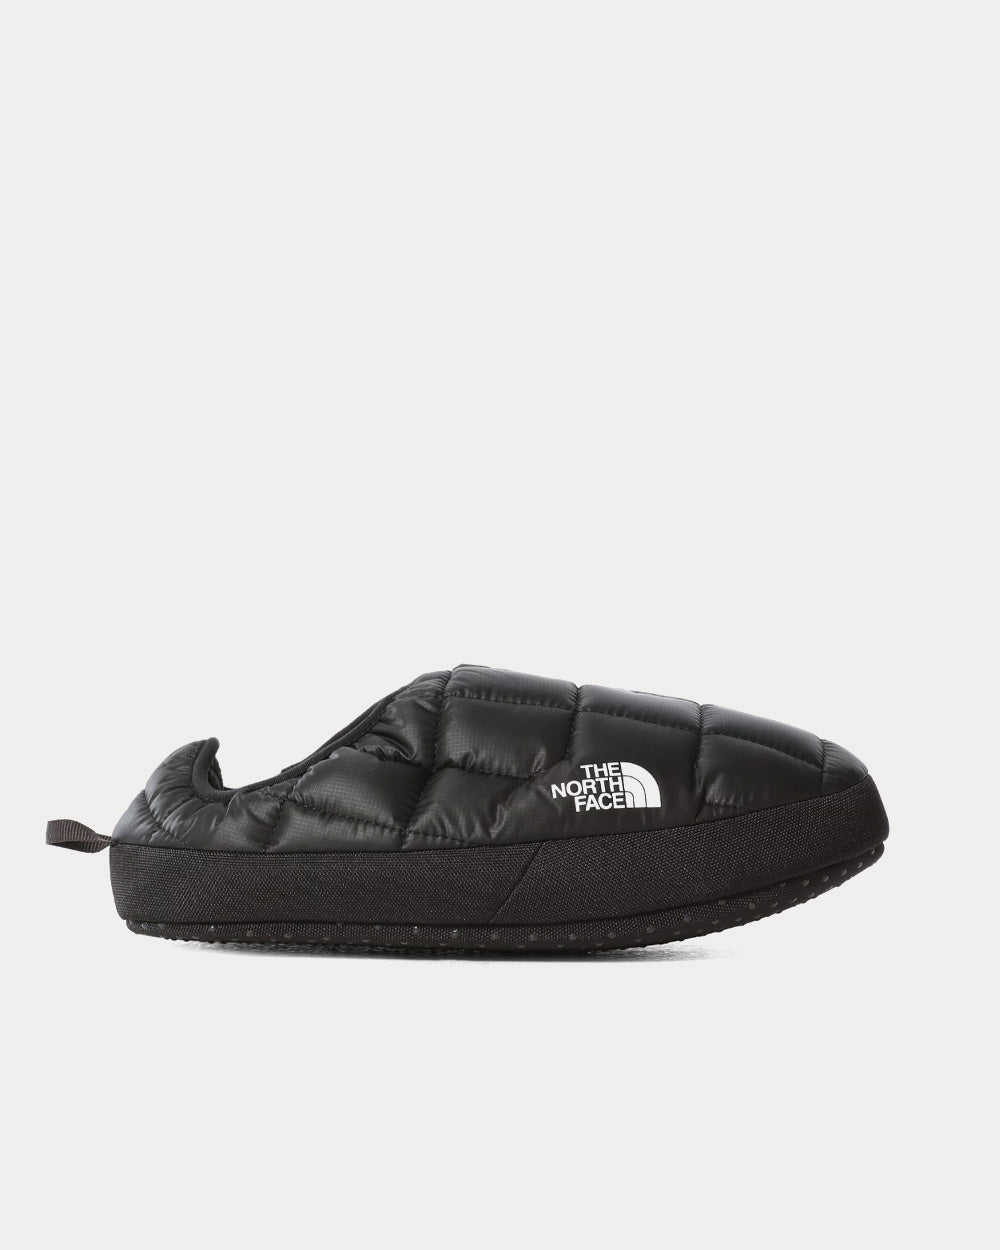 The North Face - Thermoball Tent V Mules Black Slip Ons